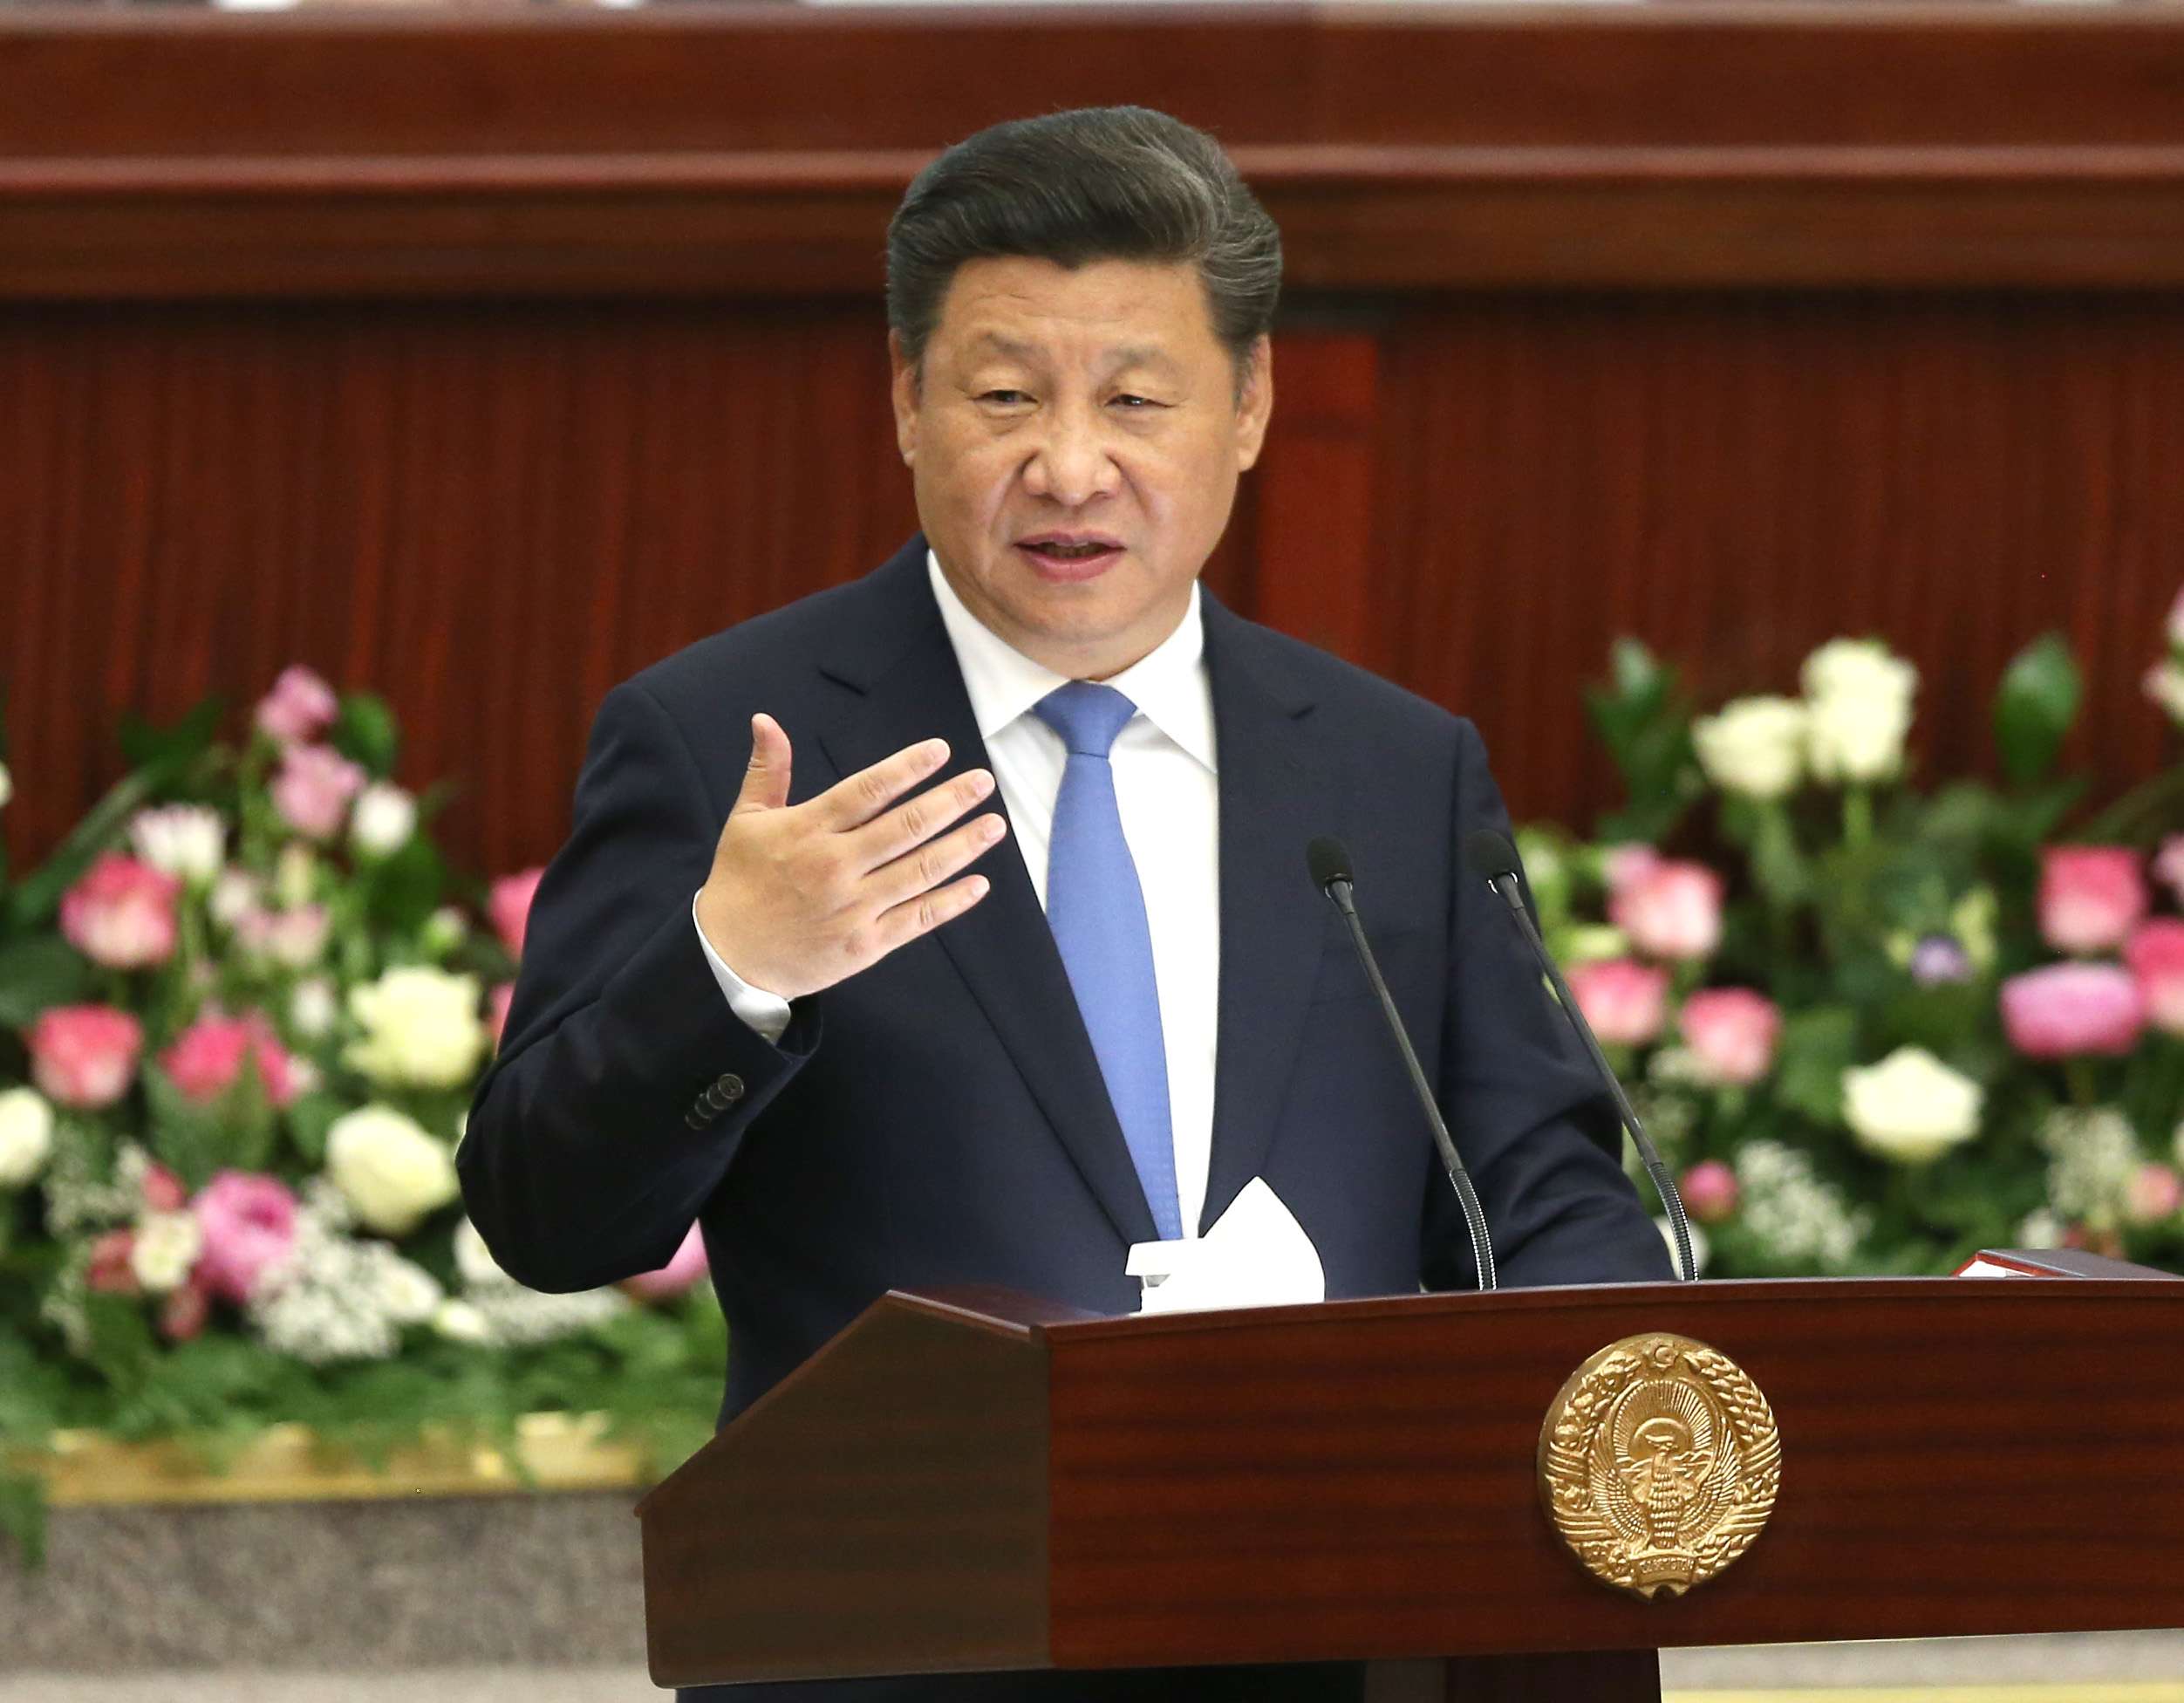 President Xi has adjusted the bar lower when it comes to expectations of future  prosperity